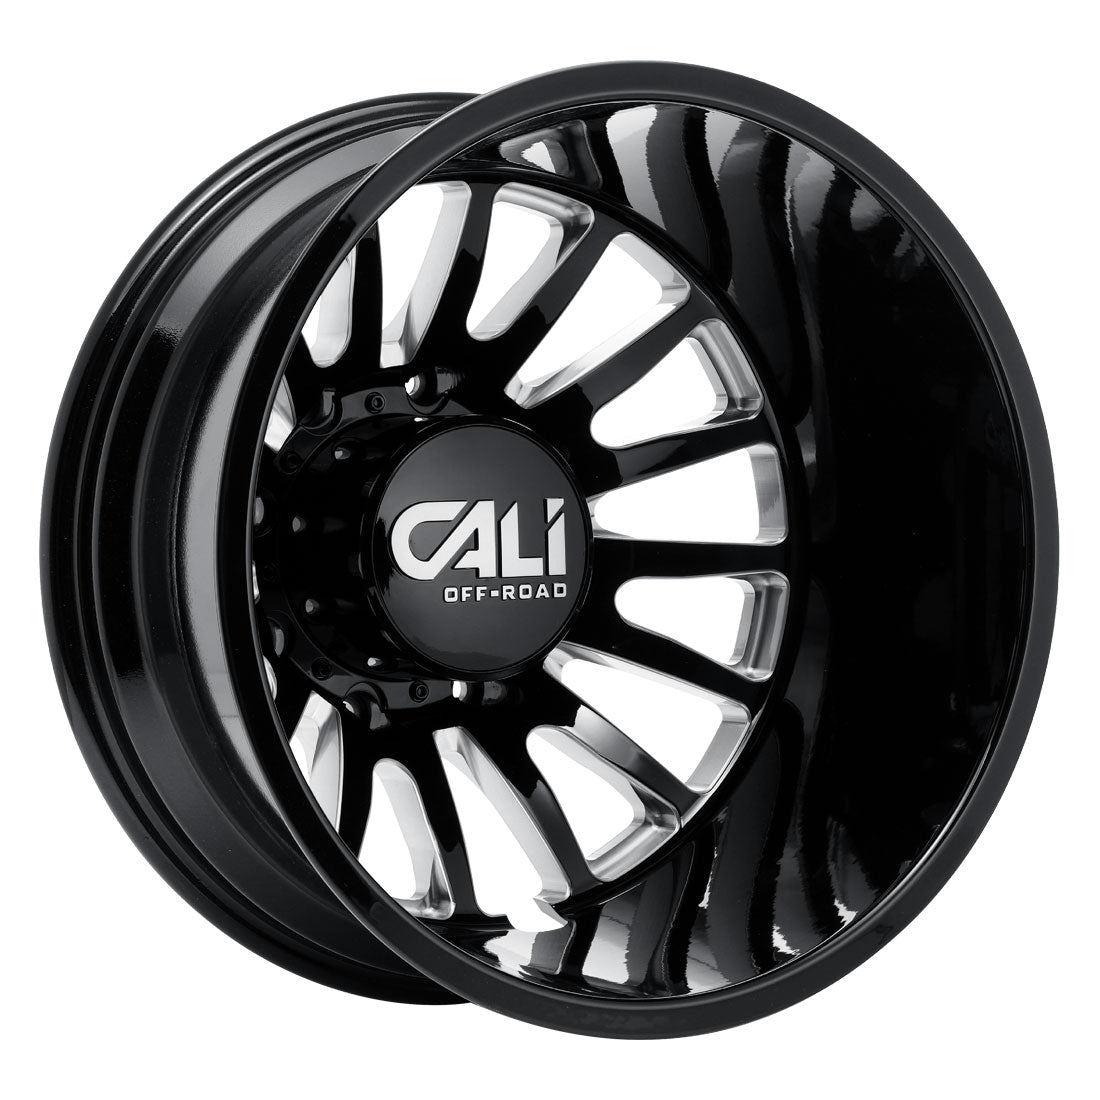 Summit 9110D Black Milled Traditional Front Open Country R/T 35X12.50R20 (34.8 x 12.50)